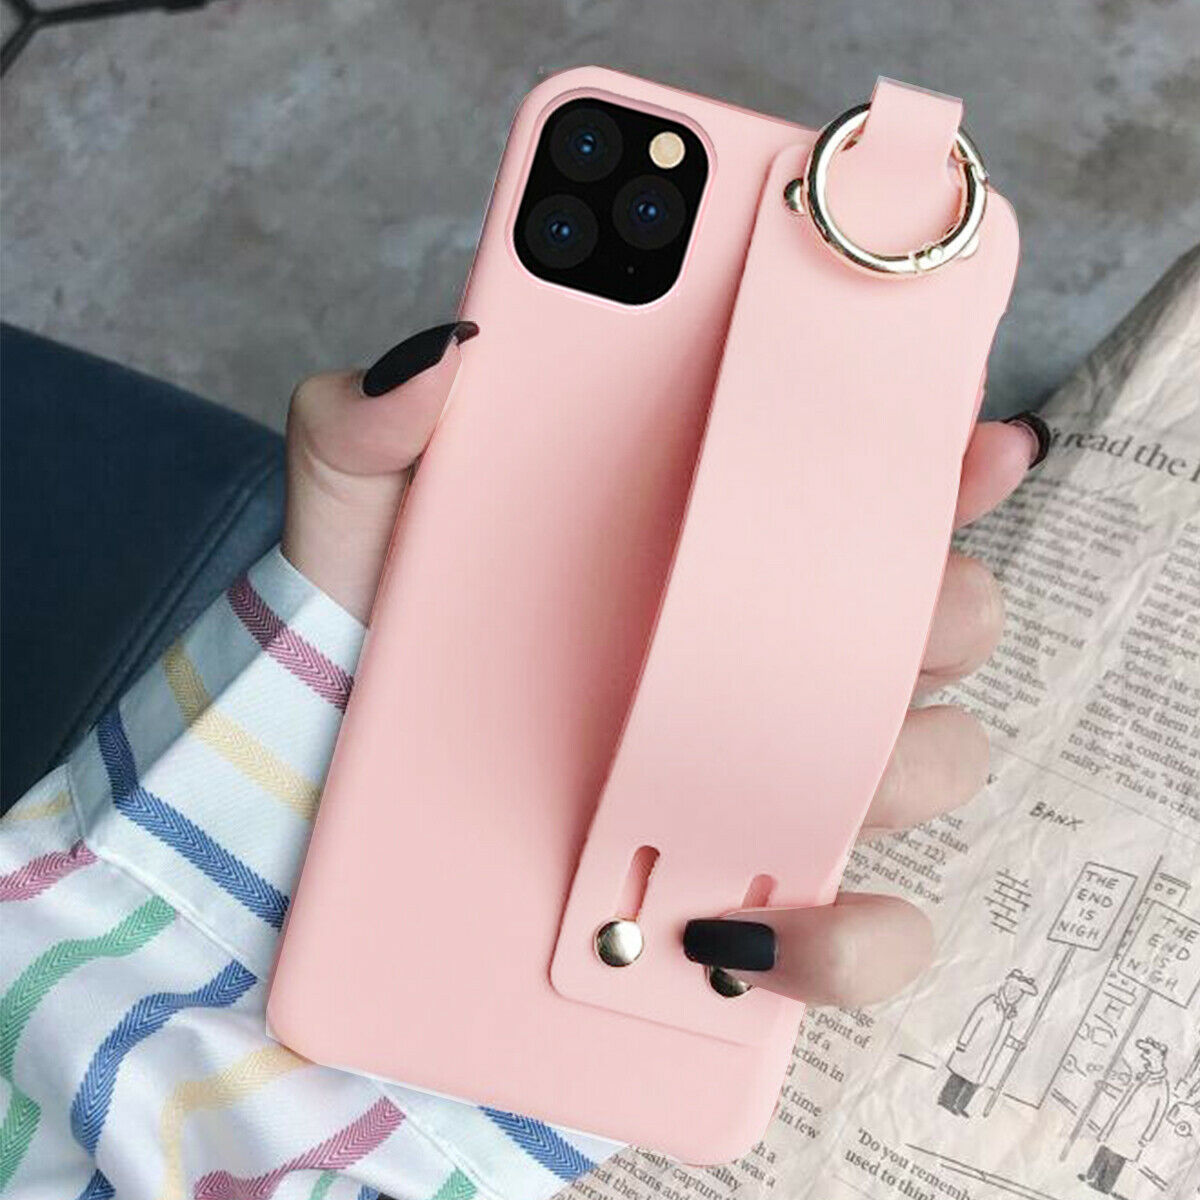 Cute Case Soft Silicone Strap for iPhone 11/12 - carolay.co